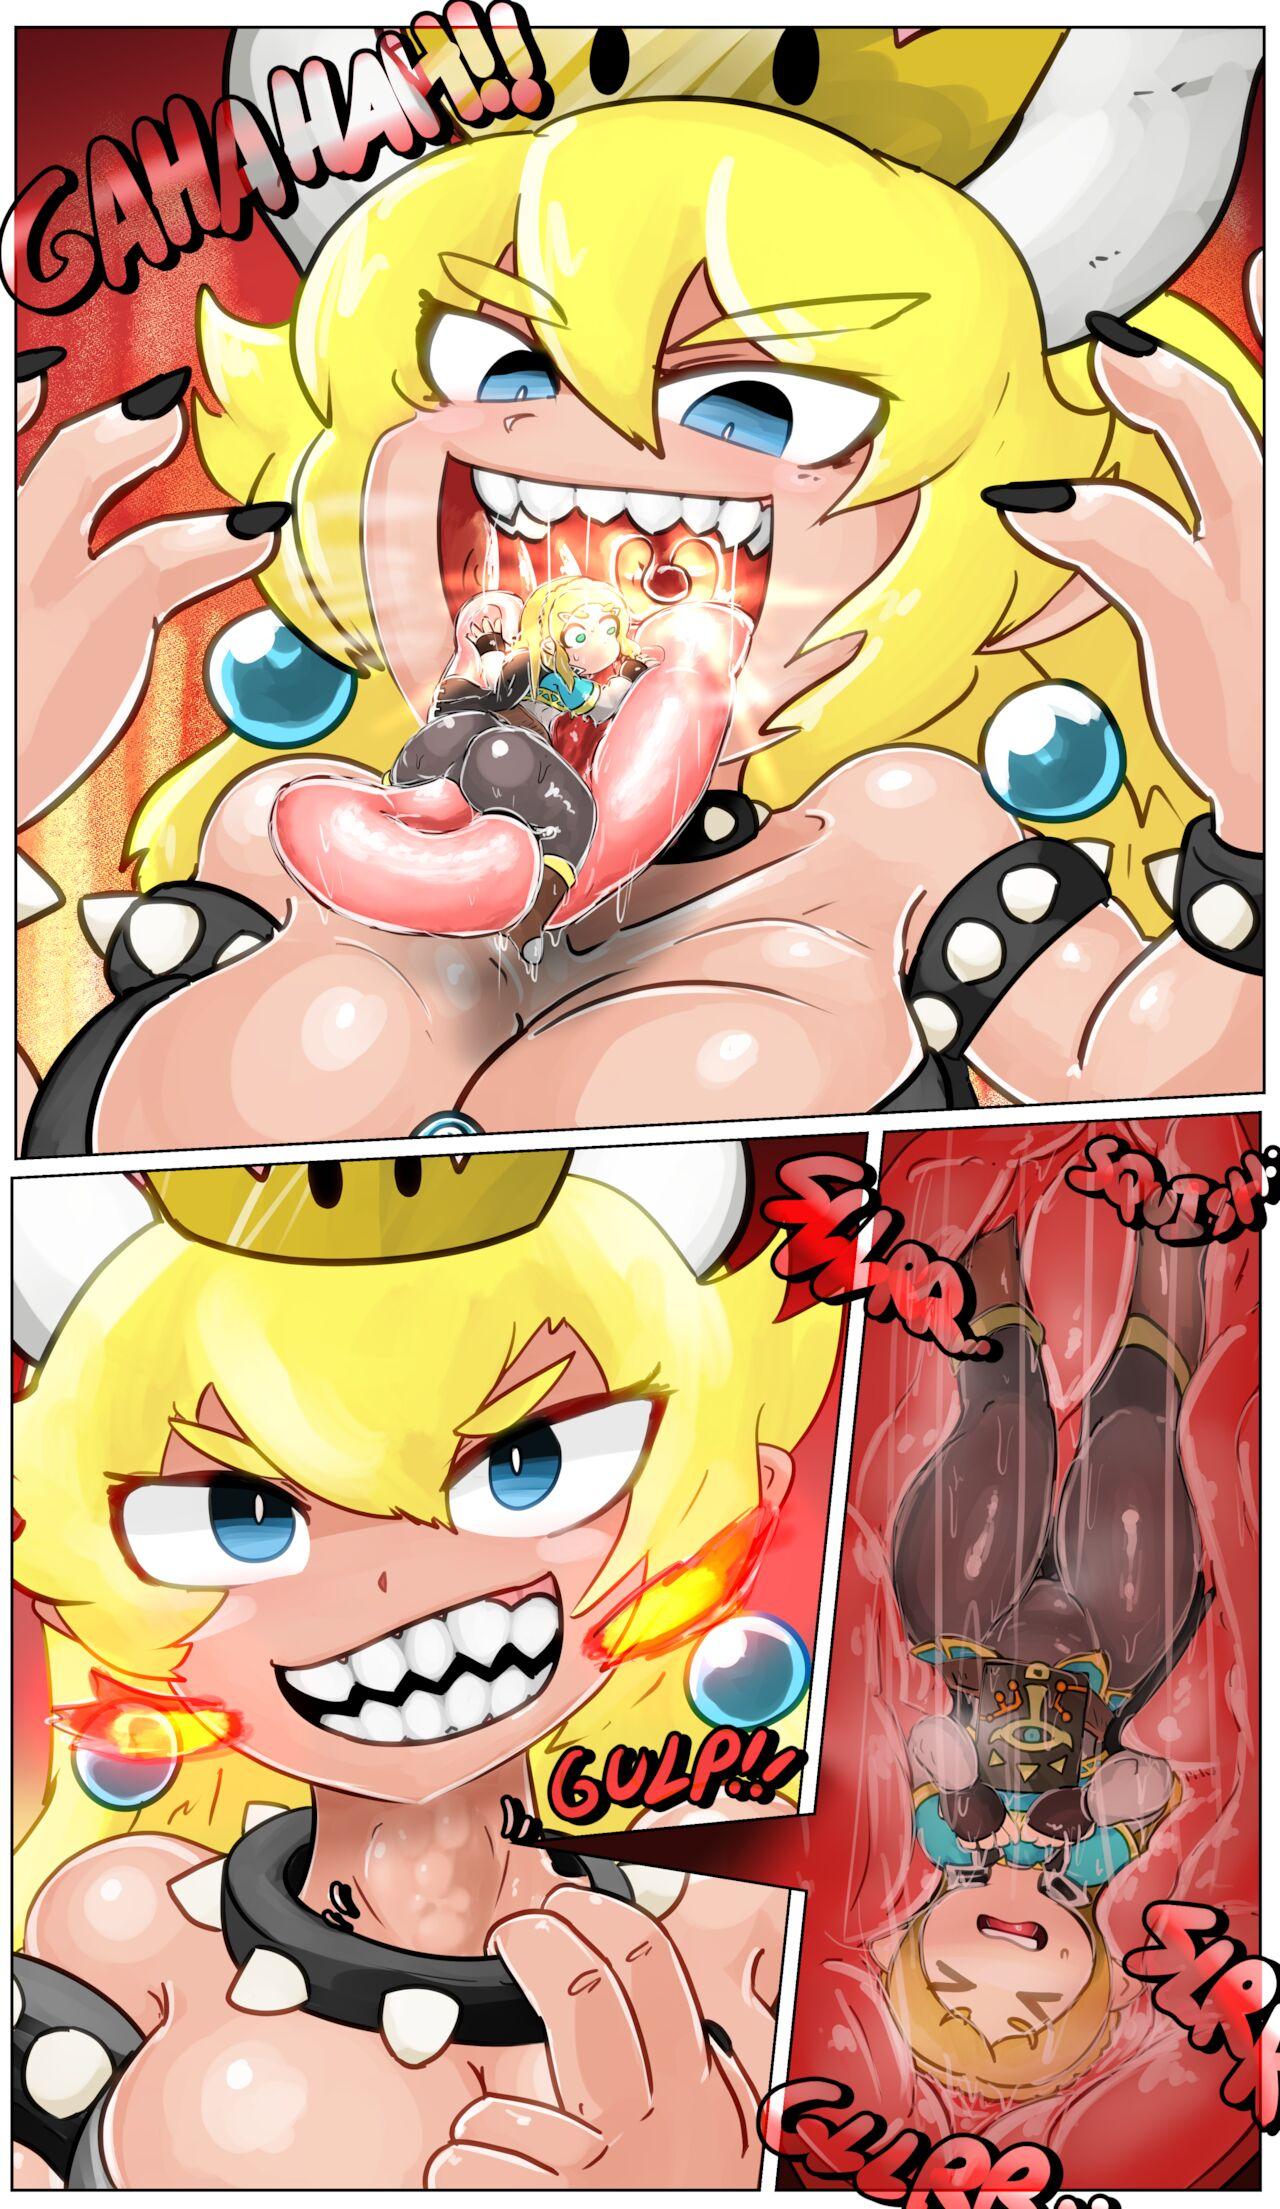 Transsexual Bowsette Inside Story - The legend of zelda Super mario brothers | super mario bros. Eurosex - Page 2